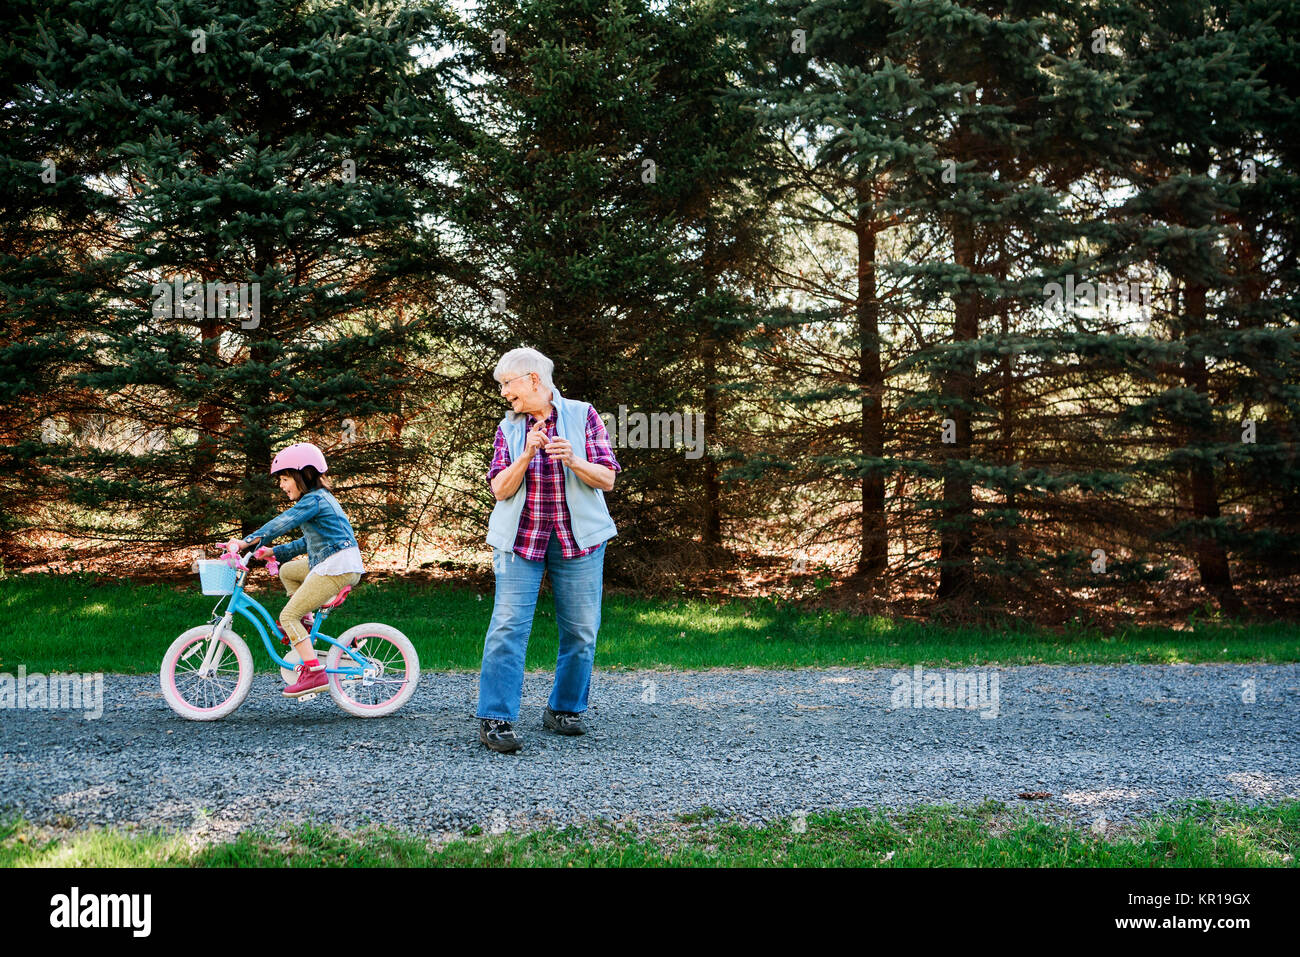 Grandmother teaching her granddaughter to ride a bicycle Stock Photo